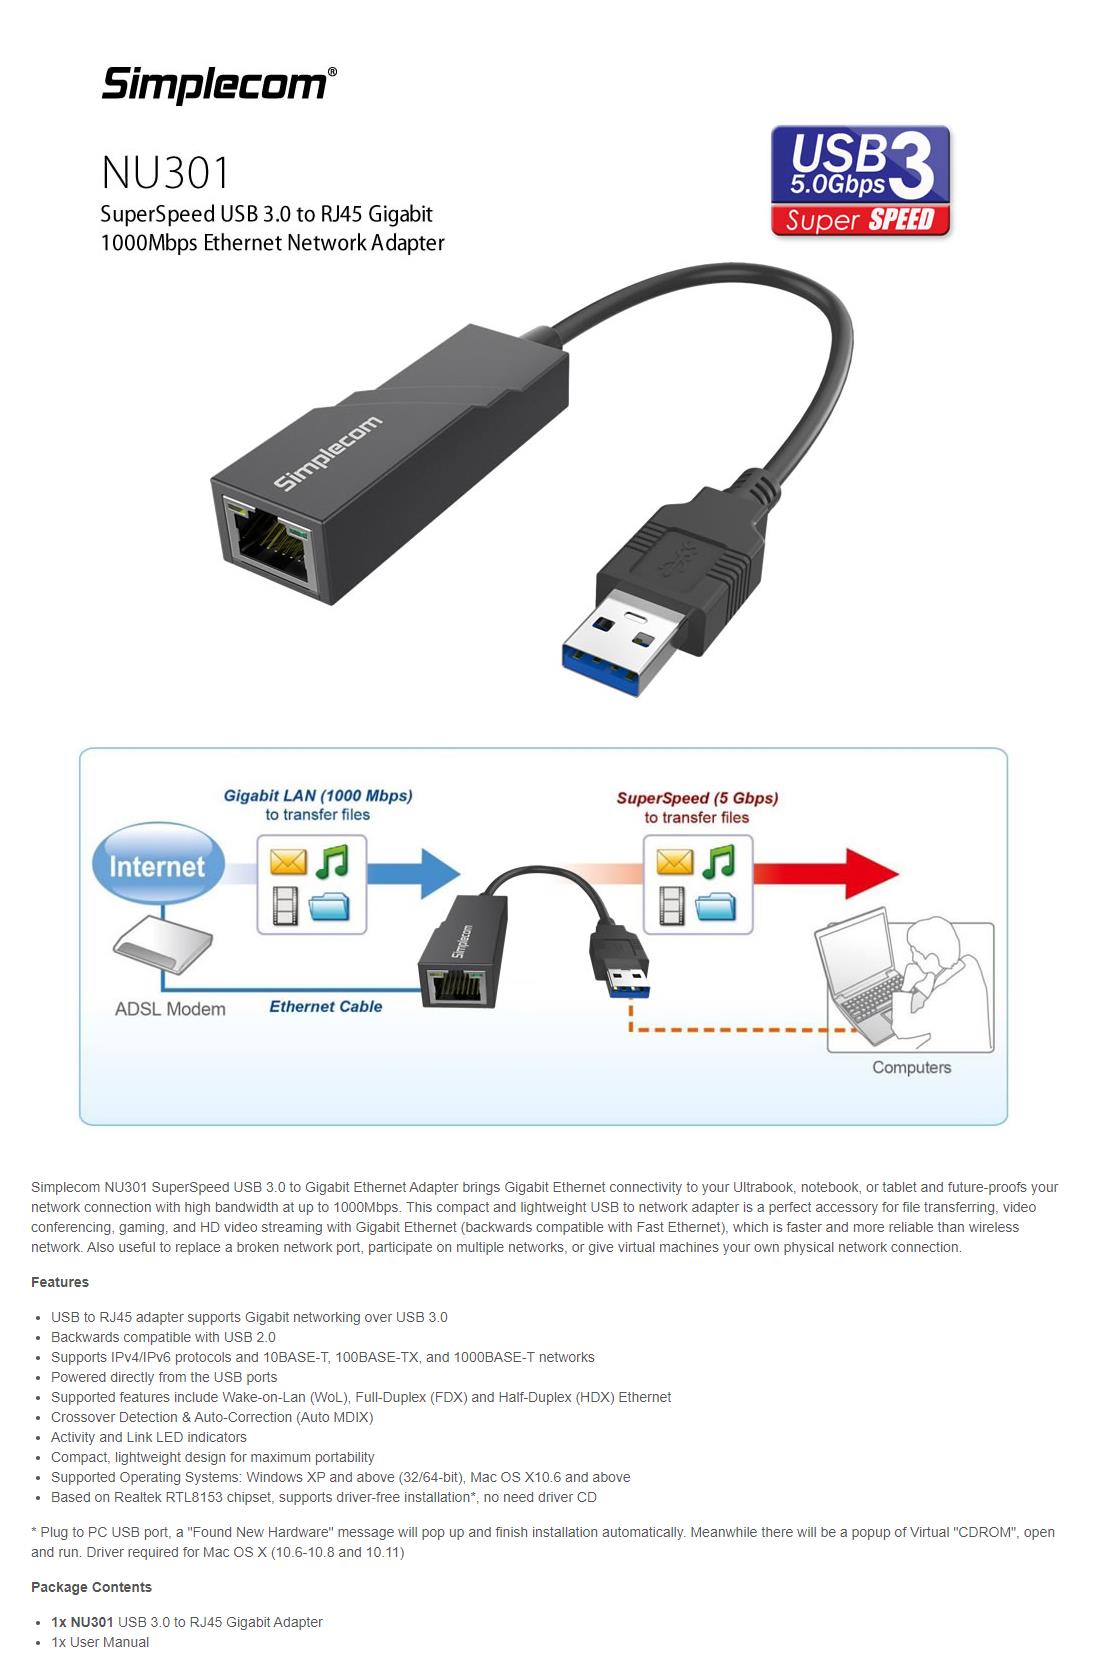 A large marketing image providing additional information about the product Simplecom NU301 USB 3.0 to RJ45 Gigabit Ethernet Network Adapter - Additional alt info not provided